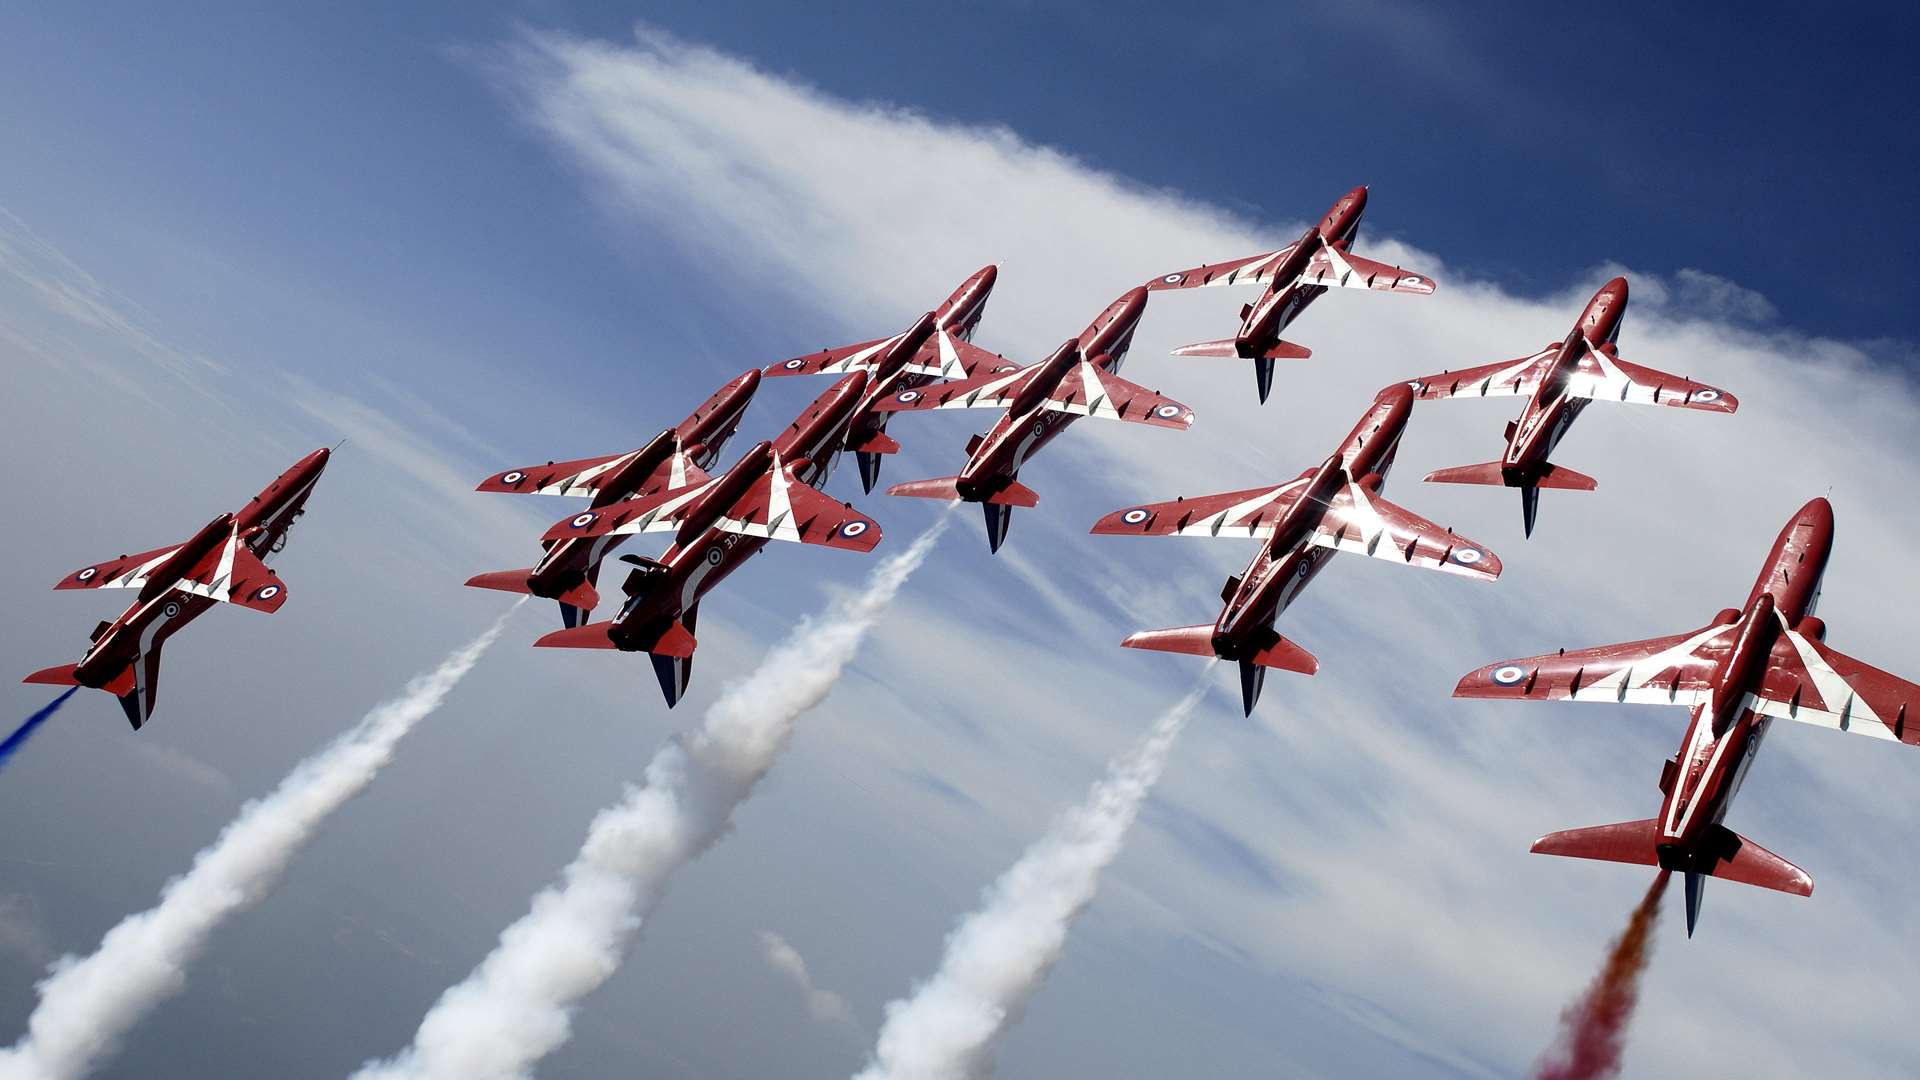 The Red Arrows are heading to Herne Bay